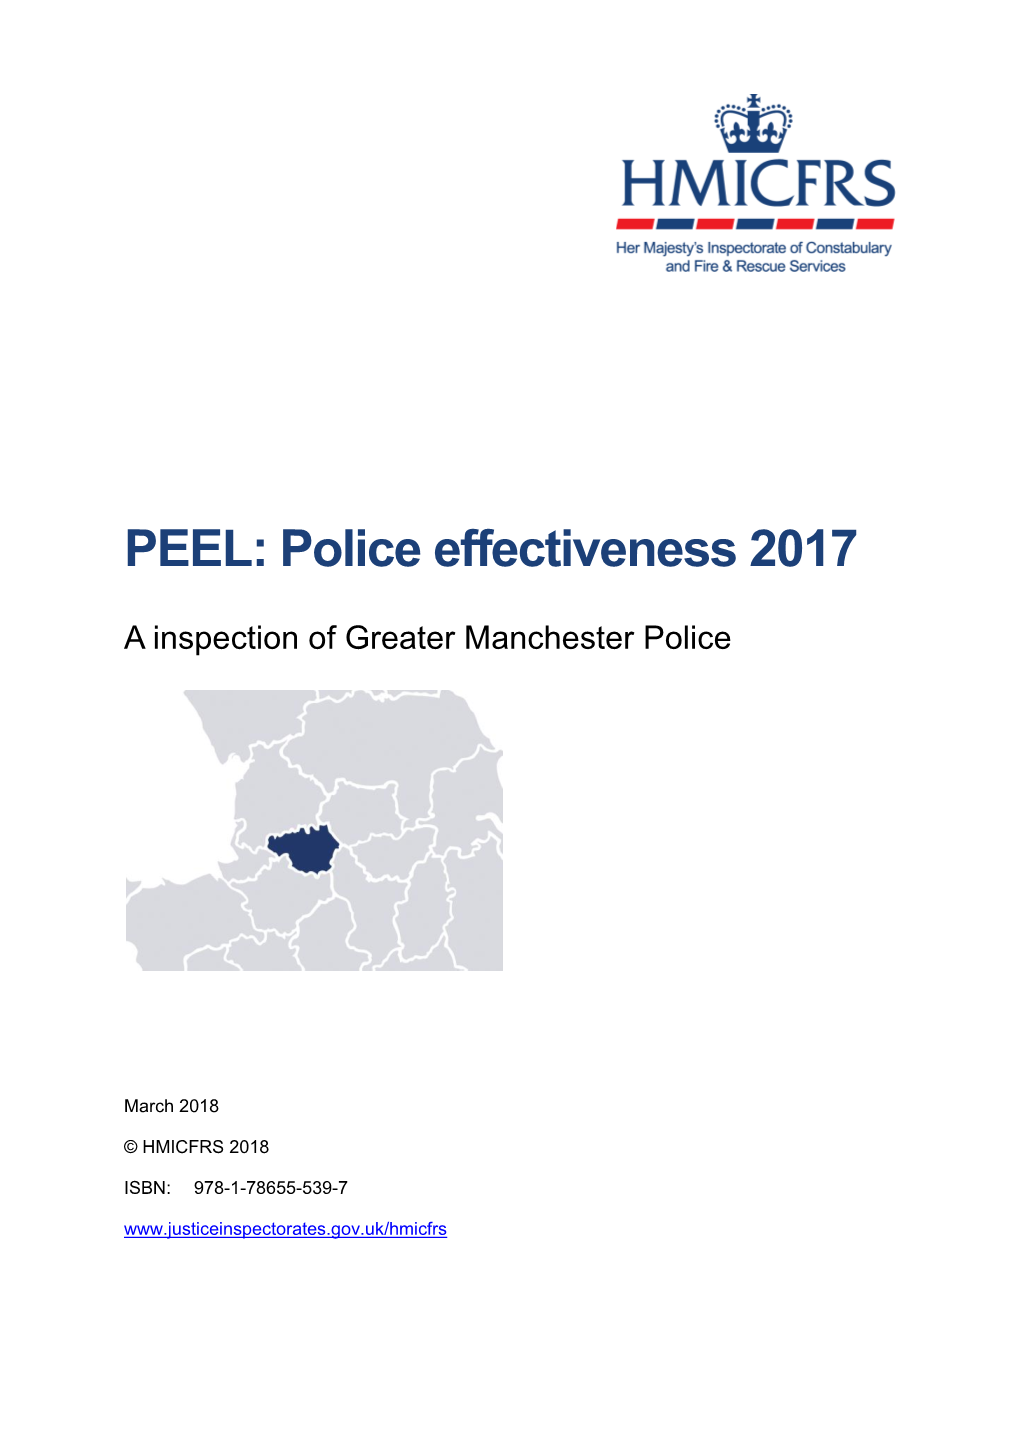 PEEL: Police Effectiveness 2017 – Greater Manchester Police